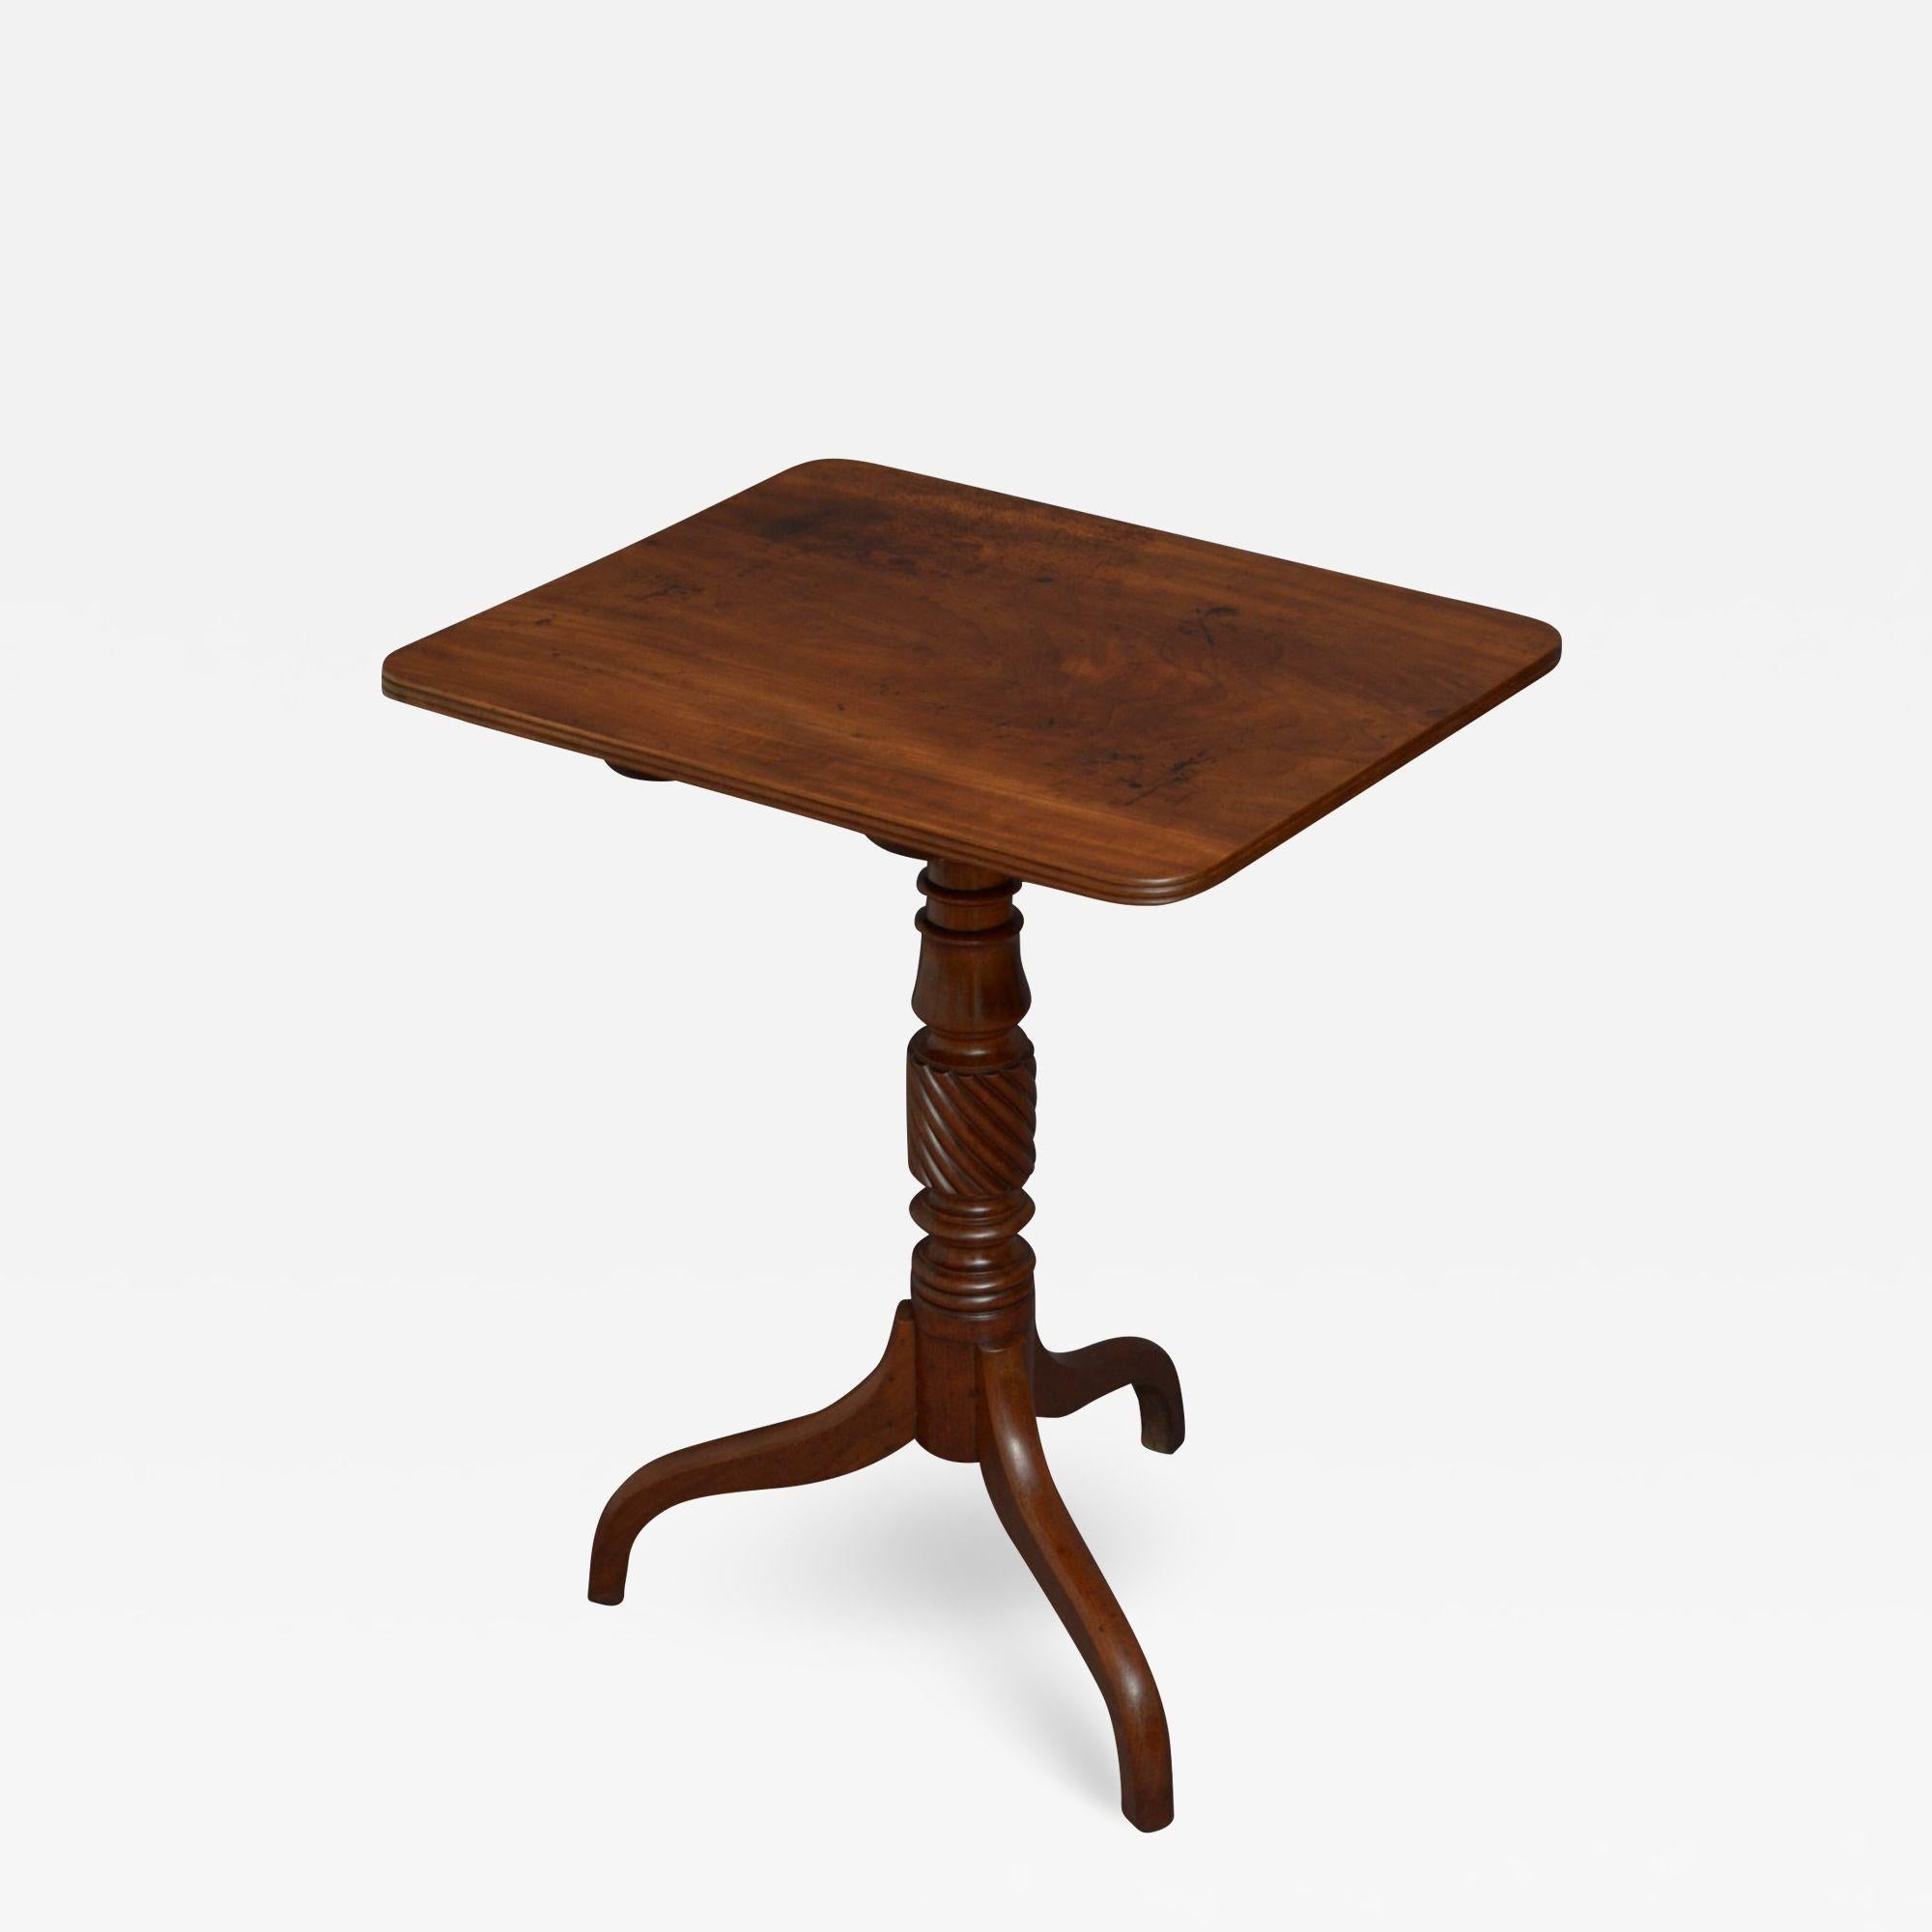 Sn4937, elegant regency mahogany occasional table, having solid, figured mahogany top with reeded edge on shaped, turned, reeded and twisted column terminating in three downswept legs. This antique table retains its original finish, colour and